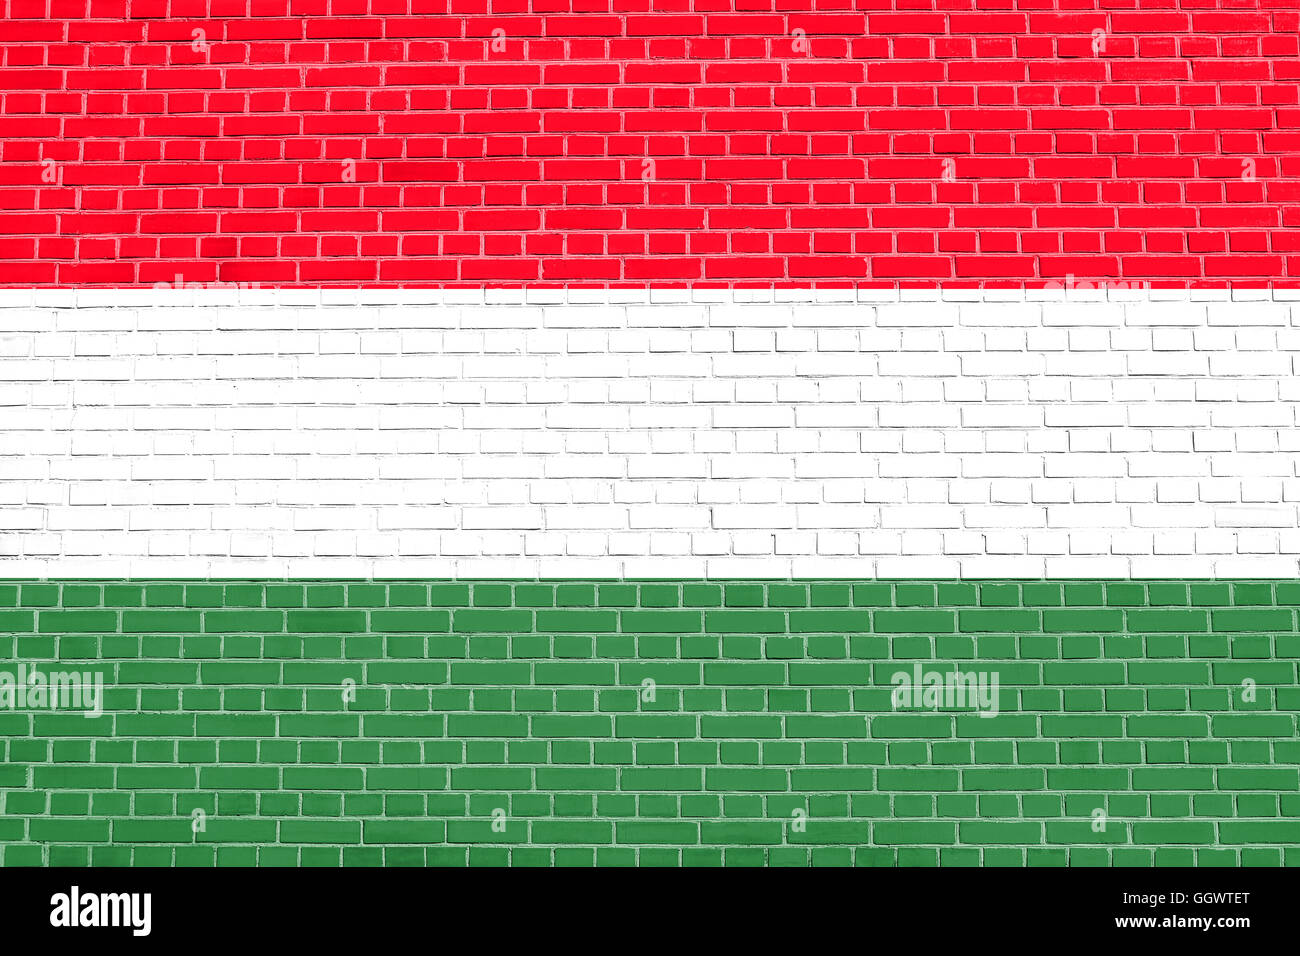 Flag of Hungary on brick wall texture background. Hungarian national flag. Stock Photo